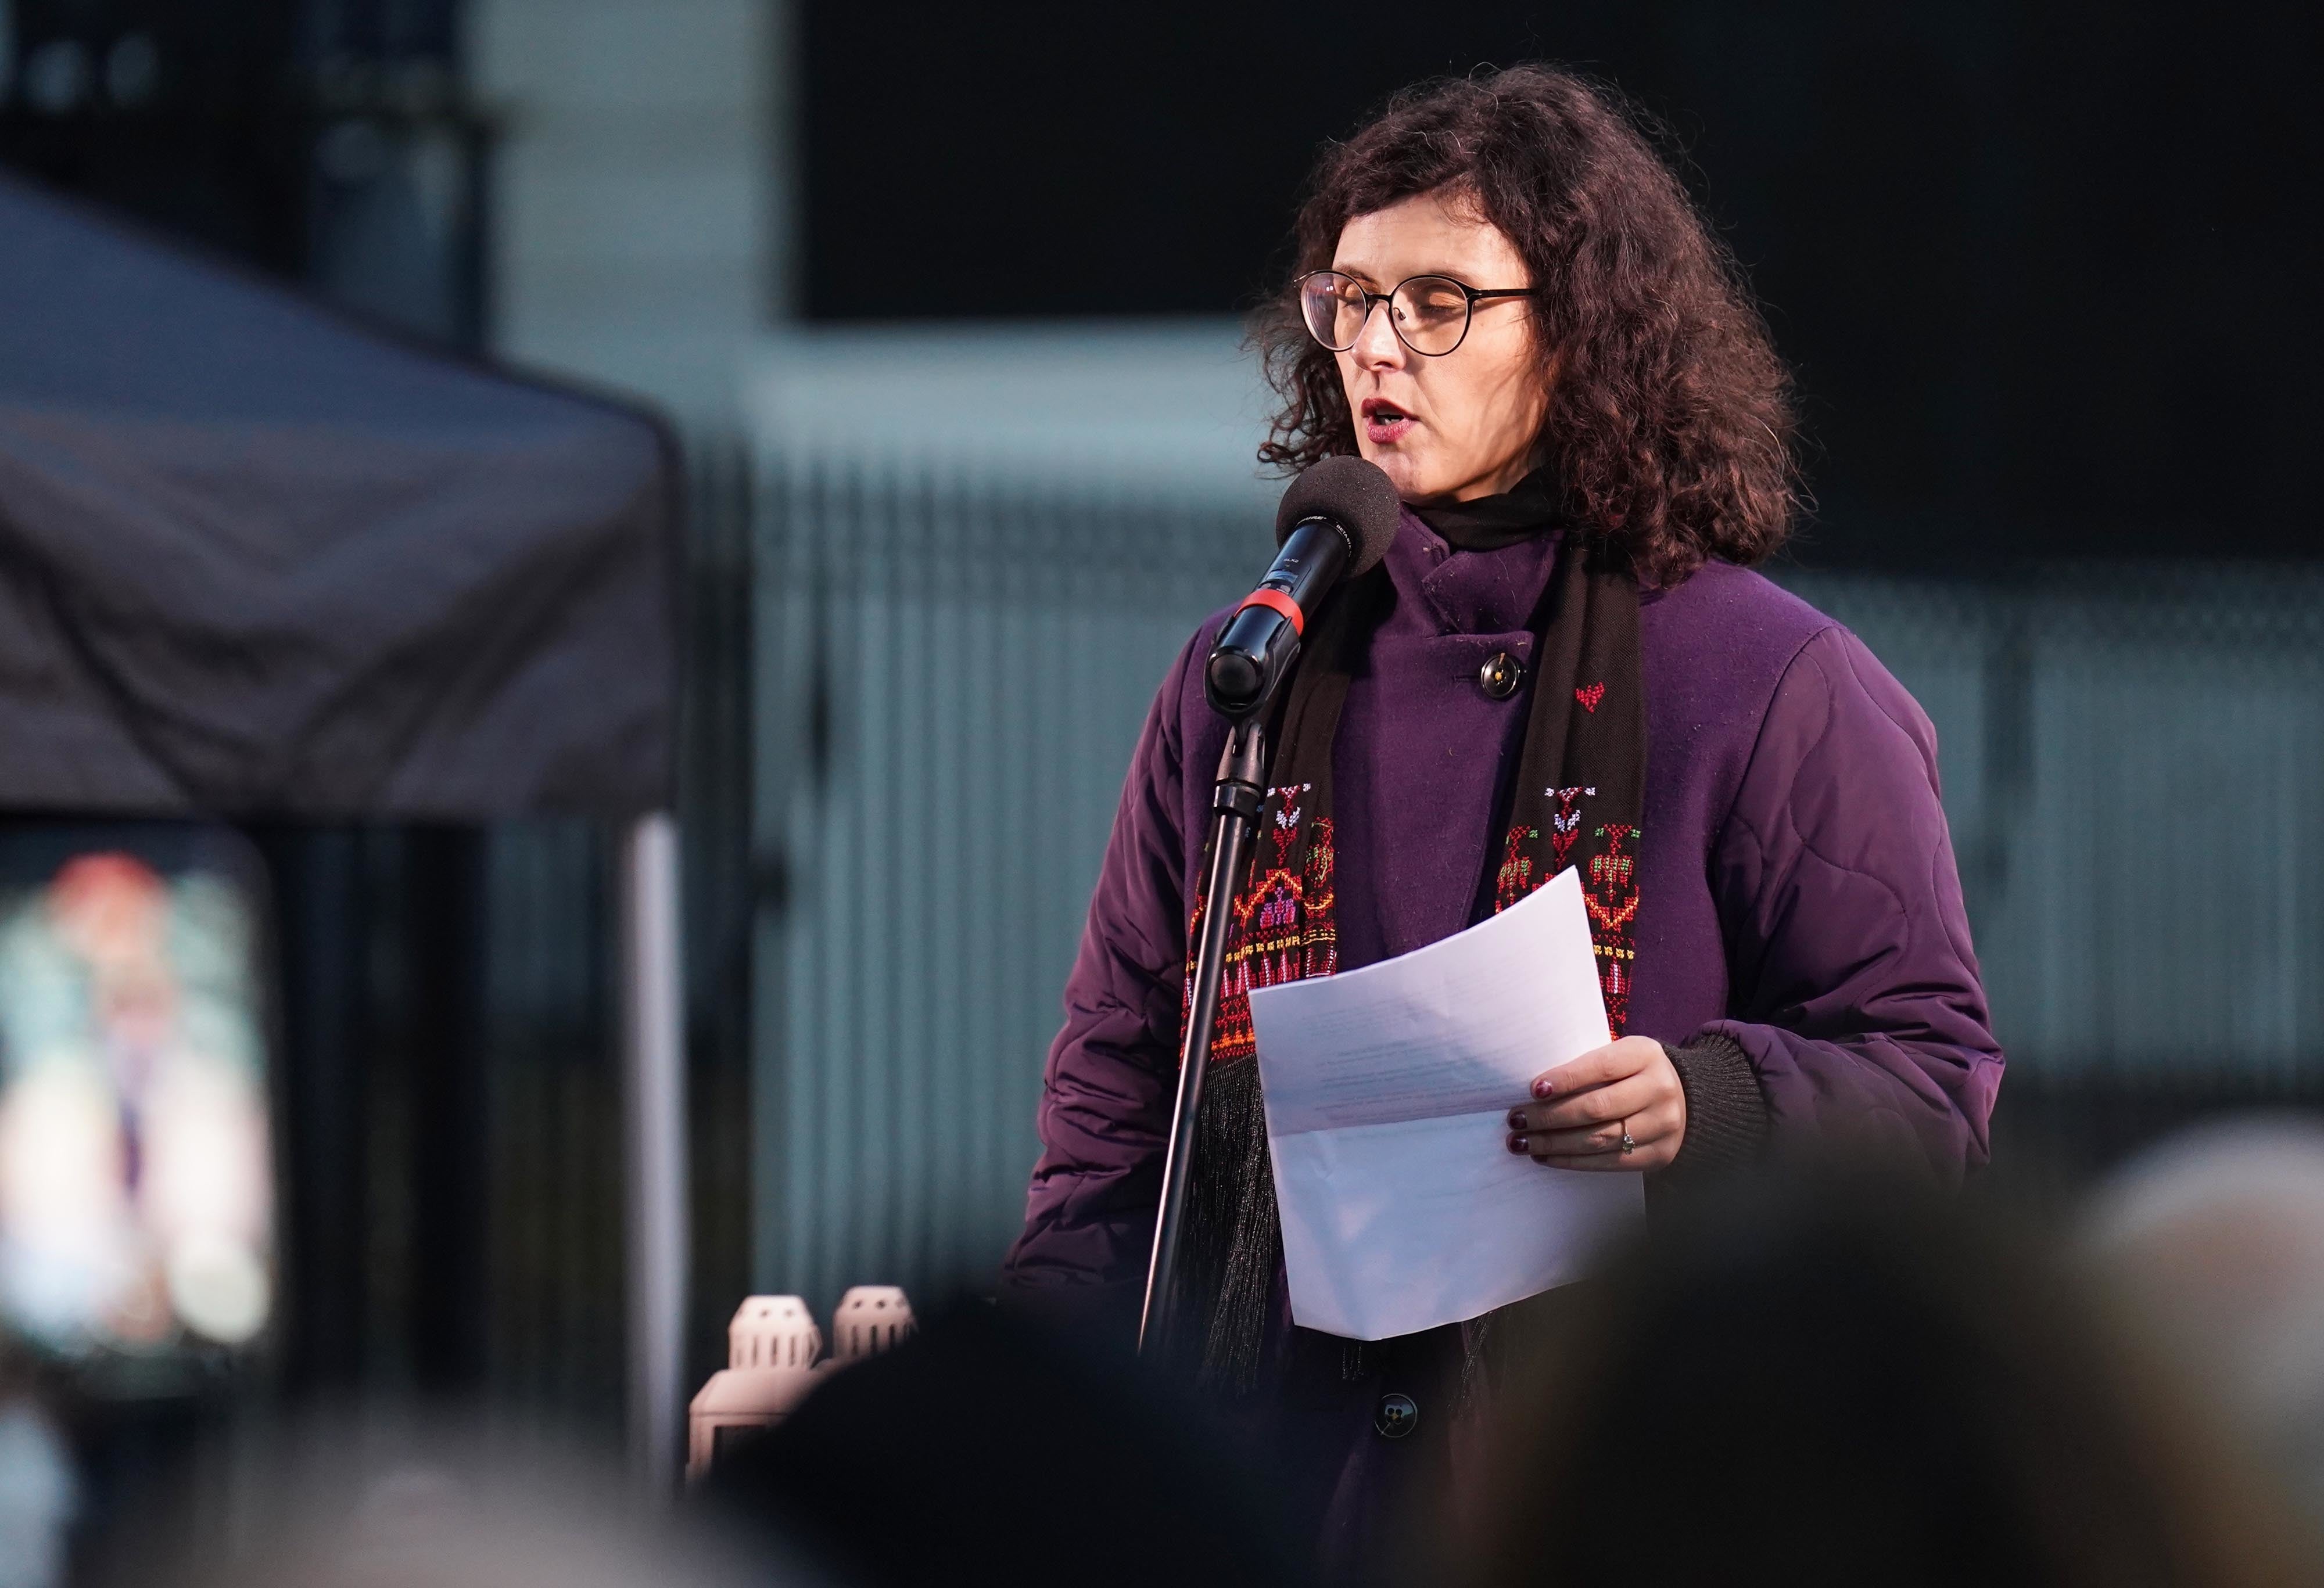 ‘My family is not justifiable collateral damage’: Liberal Democrat MP Layla Moran